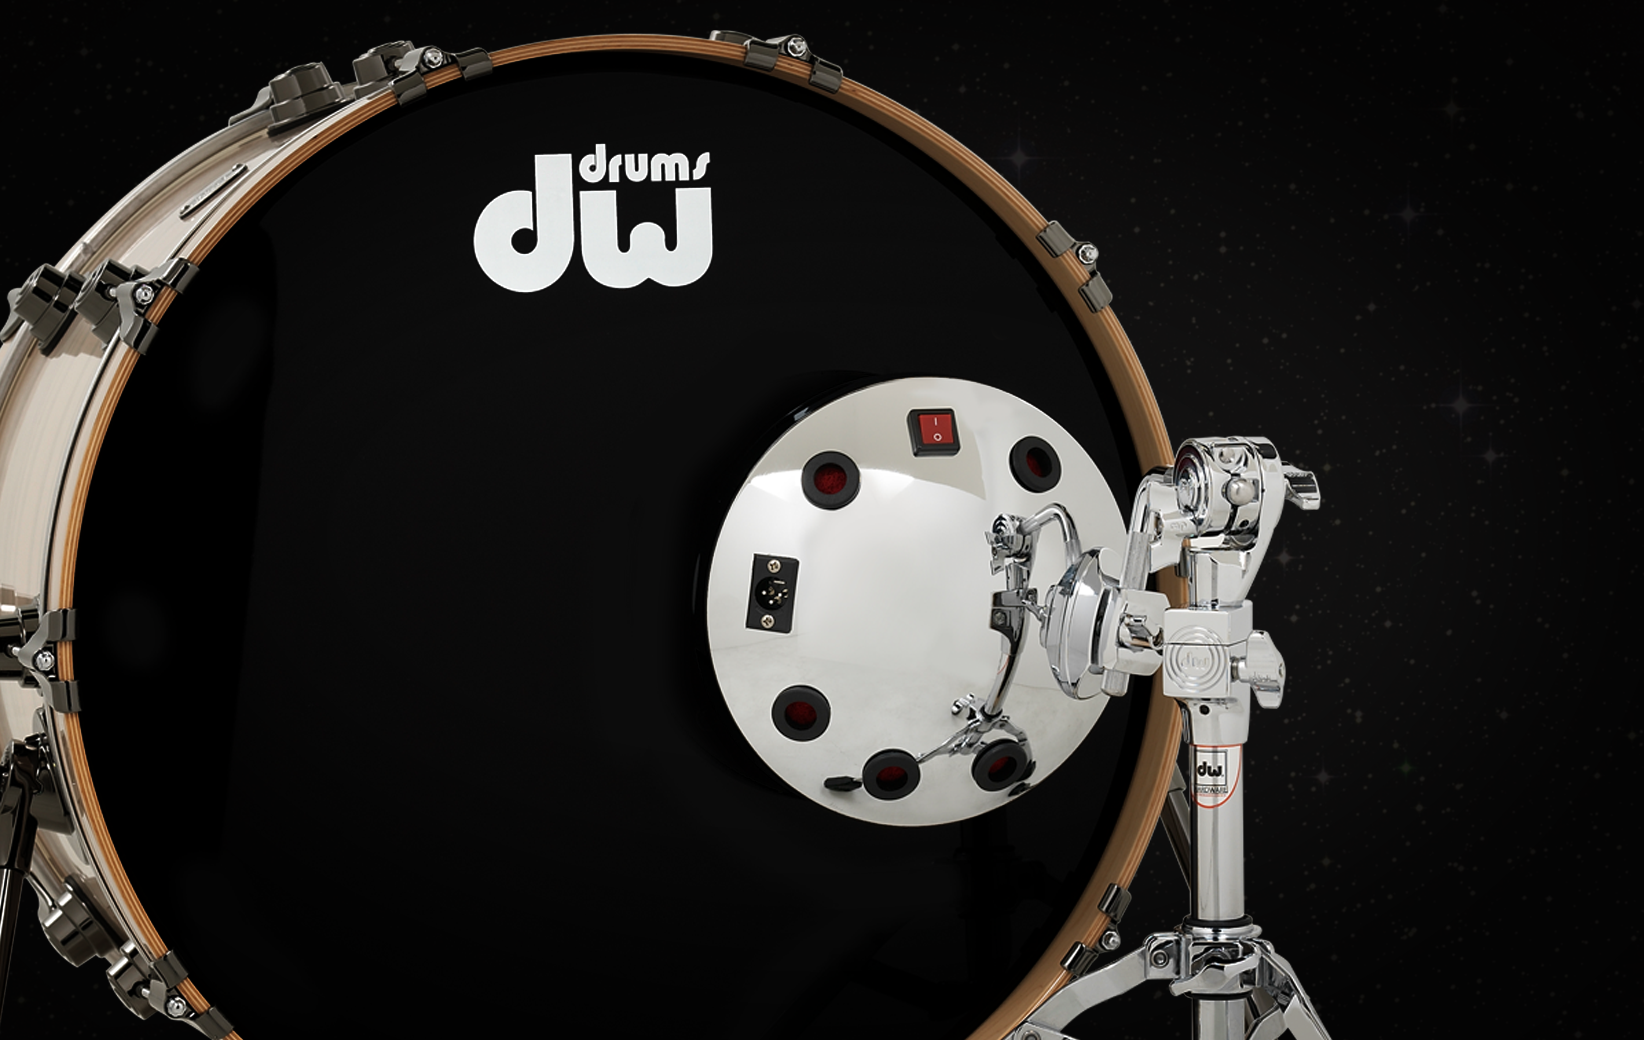 The circular DW Moon Mic enables drummers to capture authentic drum tone.